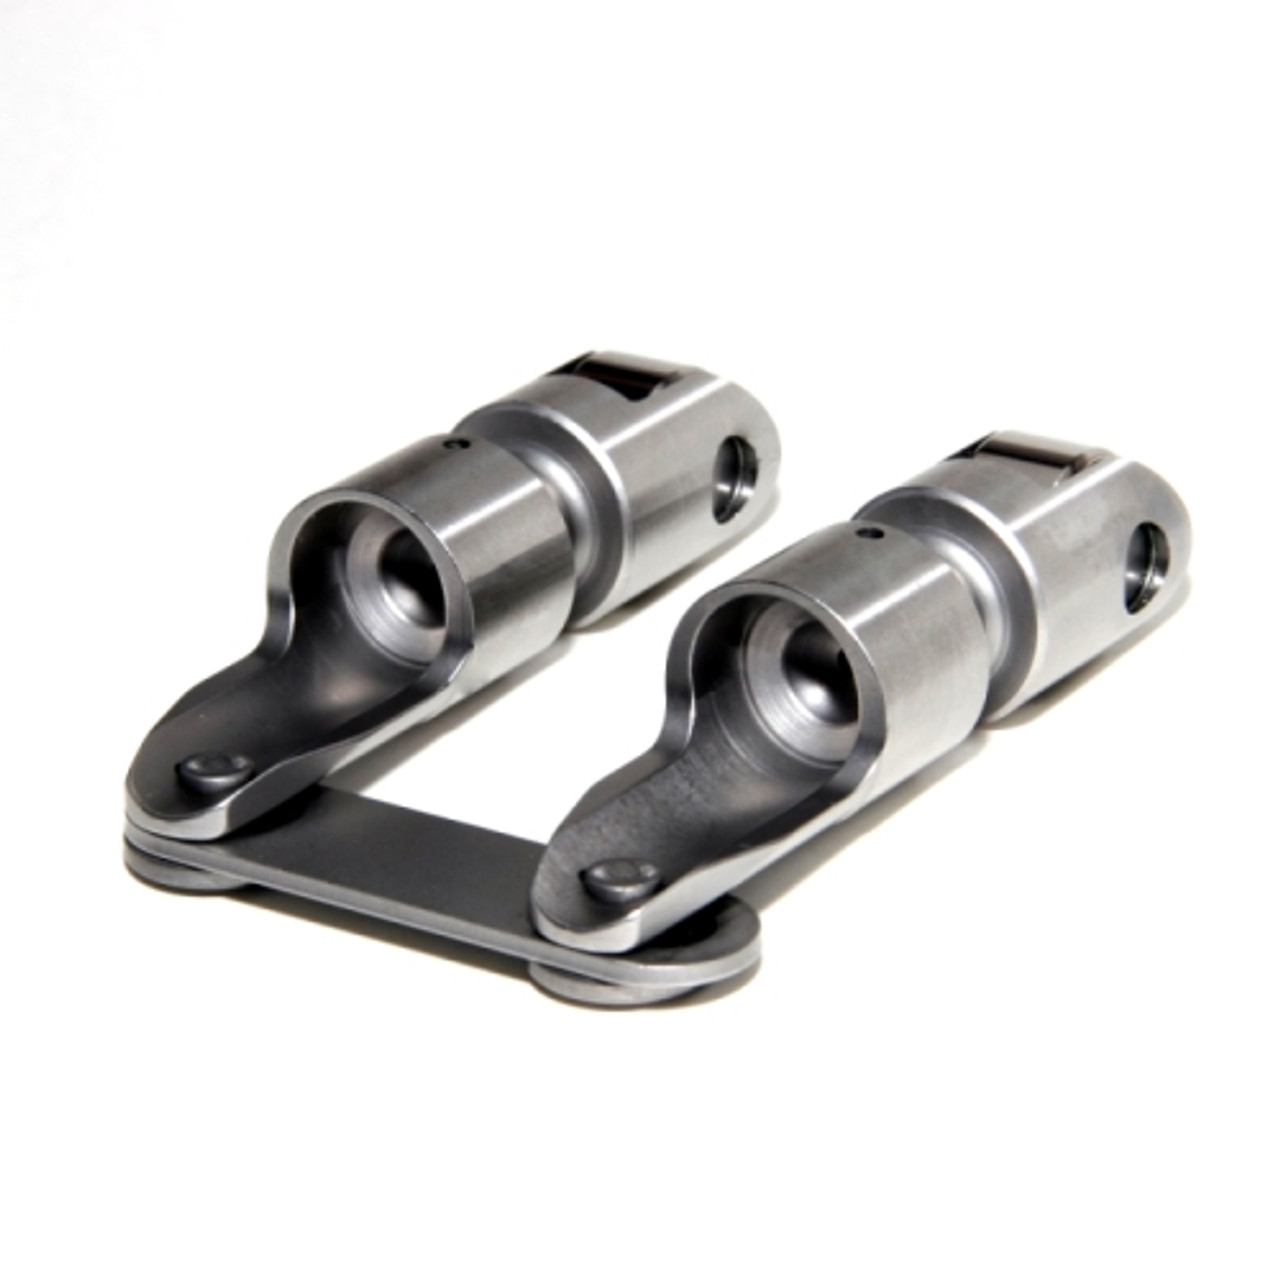 Morel 4604 / Erson RL955 Small Block Chevy Pro Race Series Solid Roller Lifters, .842" Body Dia.,  .750" Roller Dia. +.300 Tall Bowtie Vertical Tie-Bar